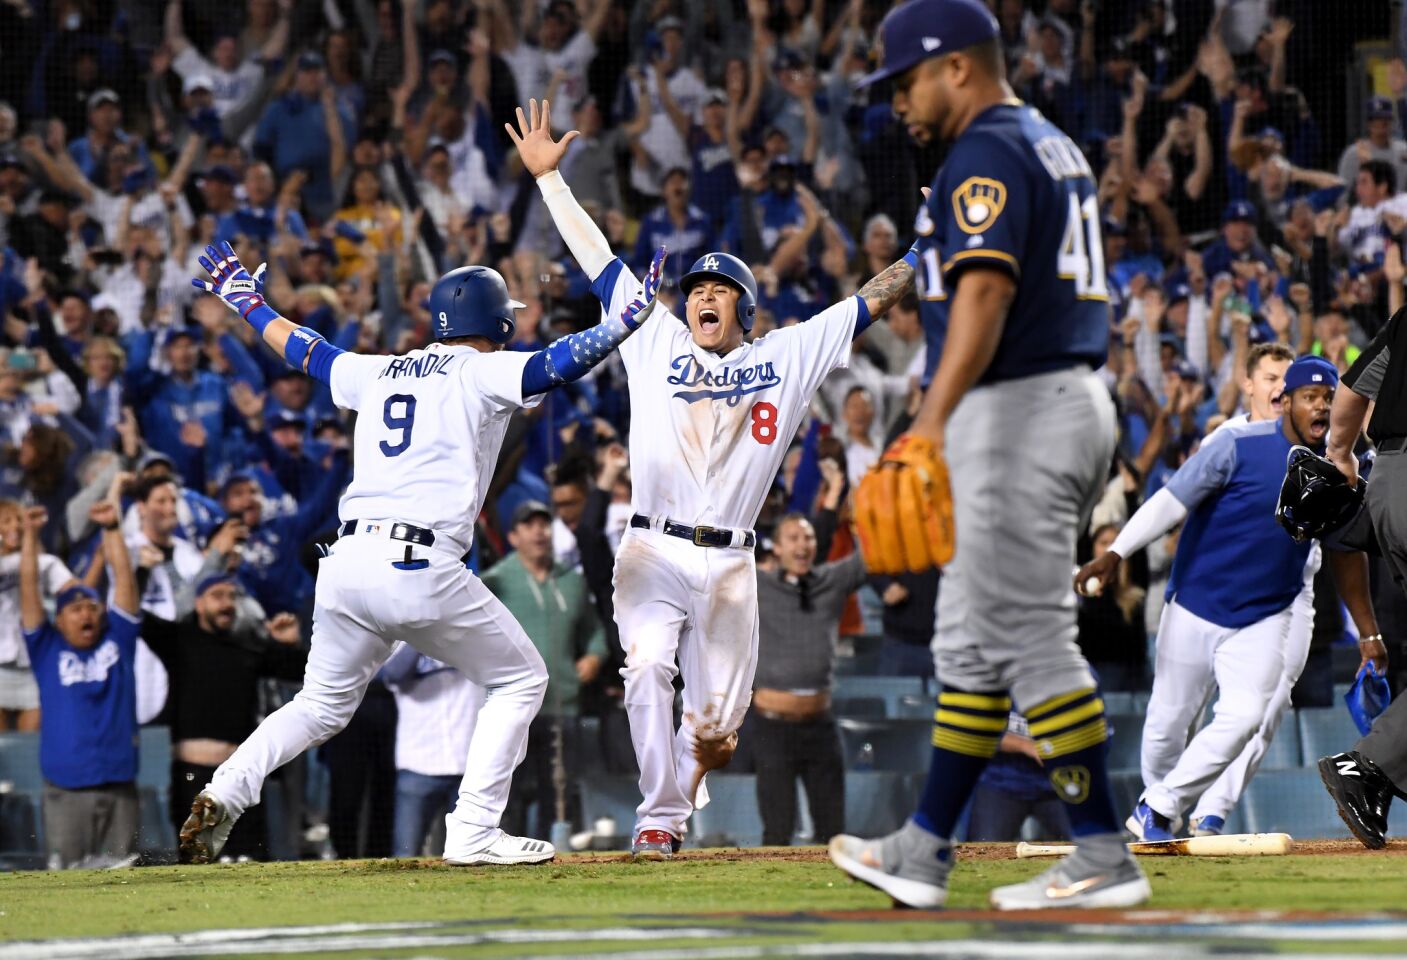 Dodgers Manny Machado scores the winning run off of Cody Bellinger's single in the 13th inning against the Brewers in Game 4 of the NLCS at Dodger Stadium Tuesday.